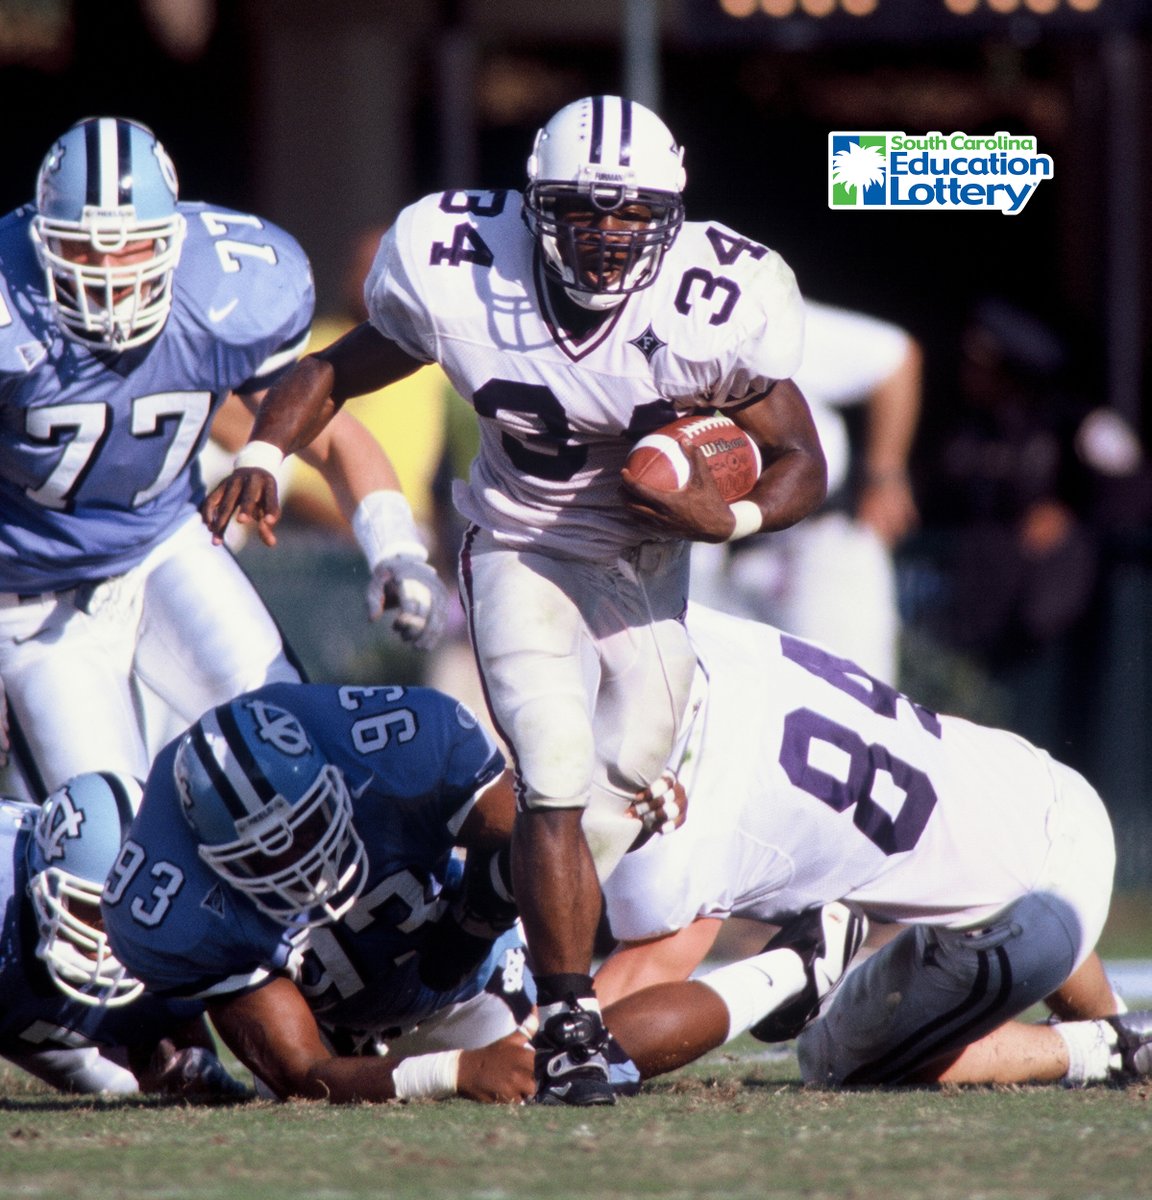 This Day In Furman Football History (Oct. 30, 1999) — Justin Hill passes for 187 yards and three touchdowns and Louis Ivory (34) runs for 177 yards to power Furman past North Carolina, 28-3, at Kenan Stadium. #FUAllTheTime